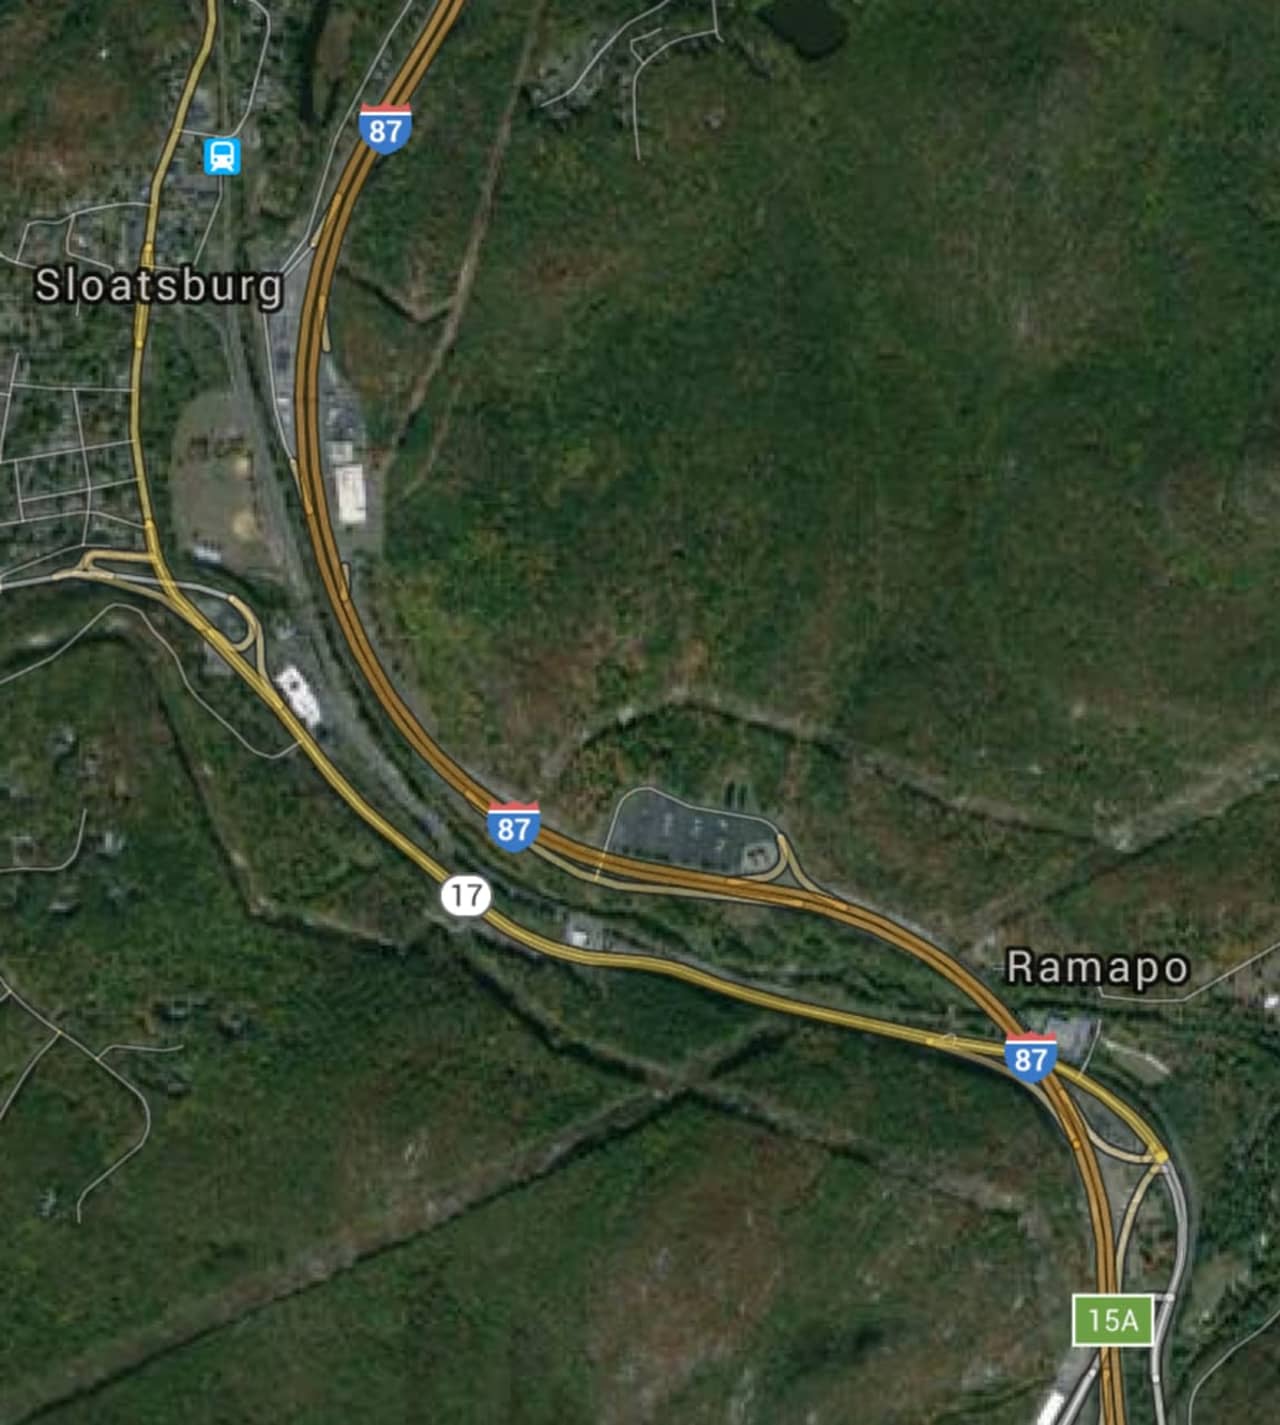 The accident occurred between Exit 15A and Exit 16 on I-87.